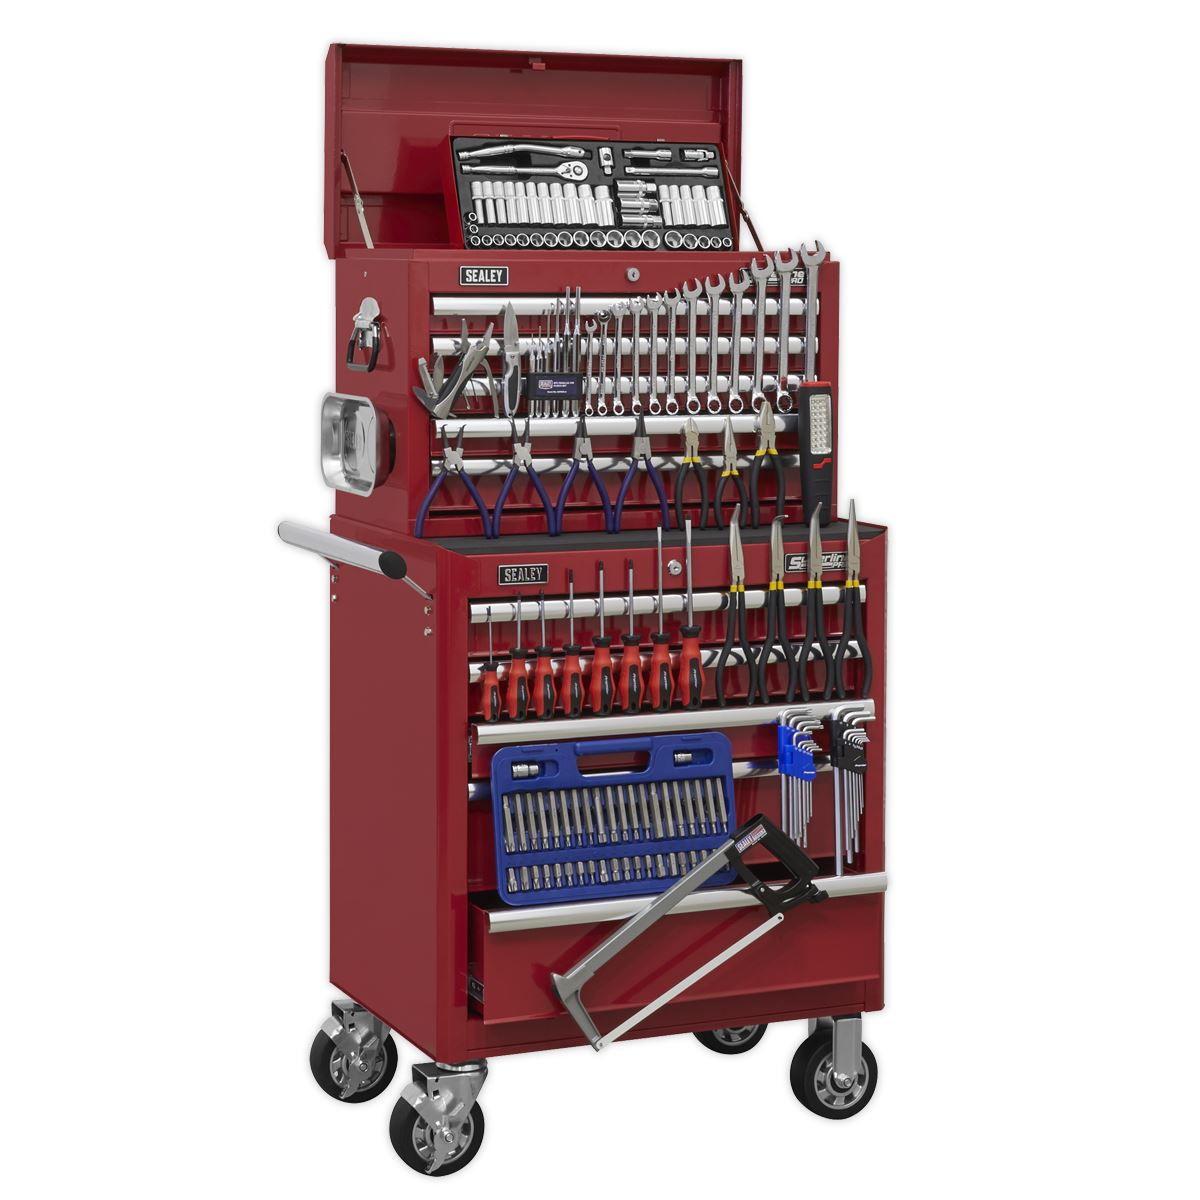 Sealey Superline Pro Topchest & Rollcab Combination 10 Drawer with Ball-Bearing Slides - Red & 148pc Tool Kit